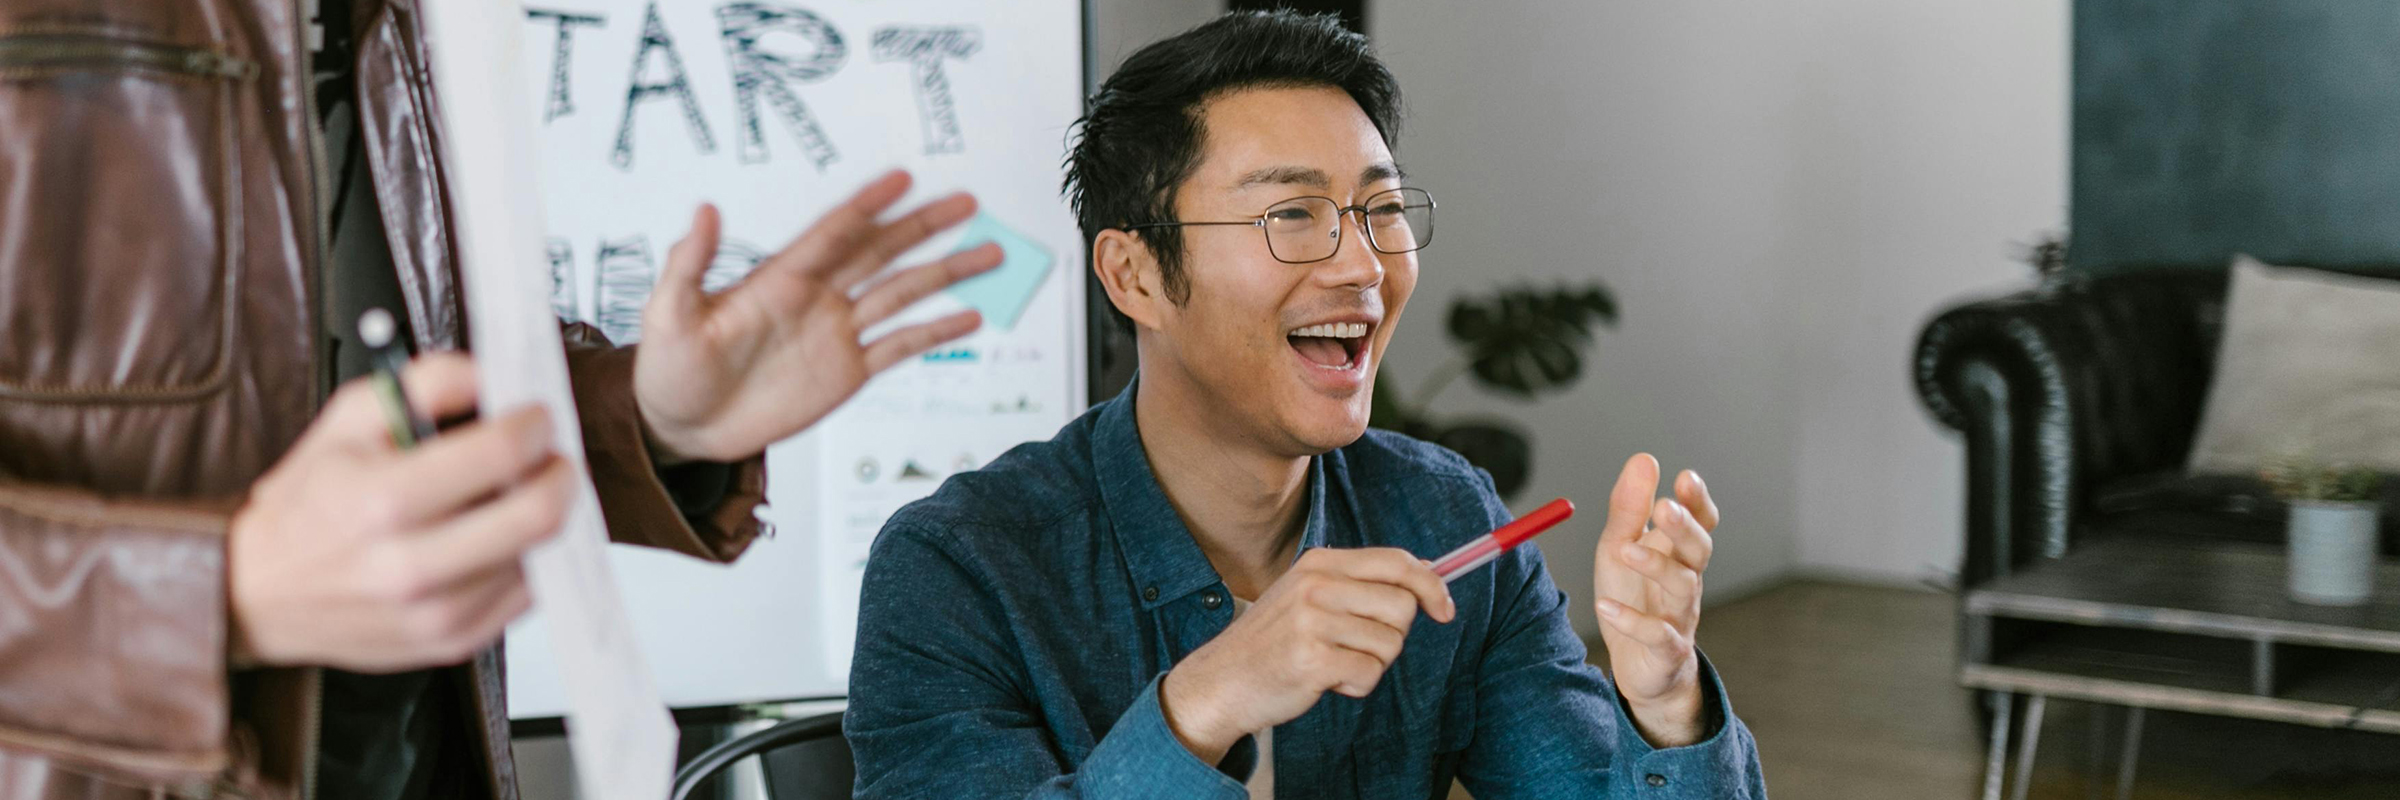 happy business person with glasses, pen, office setting